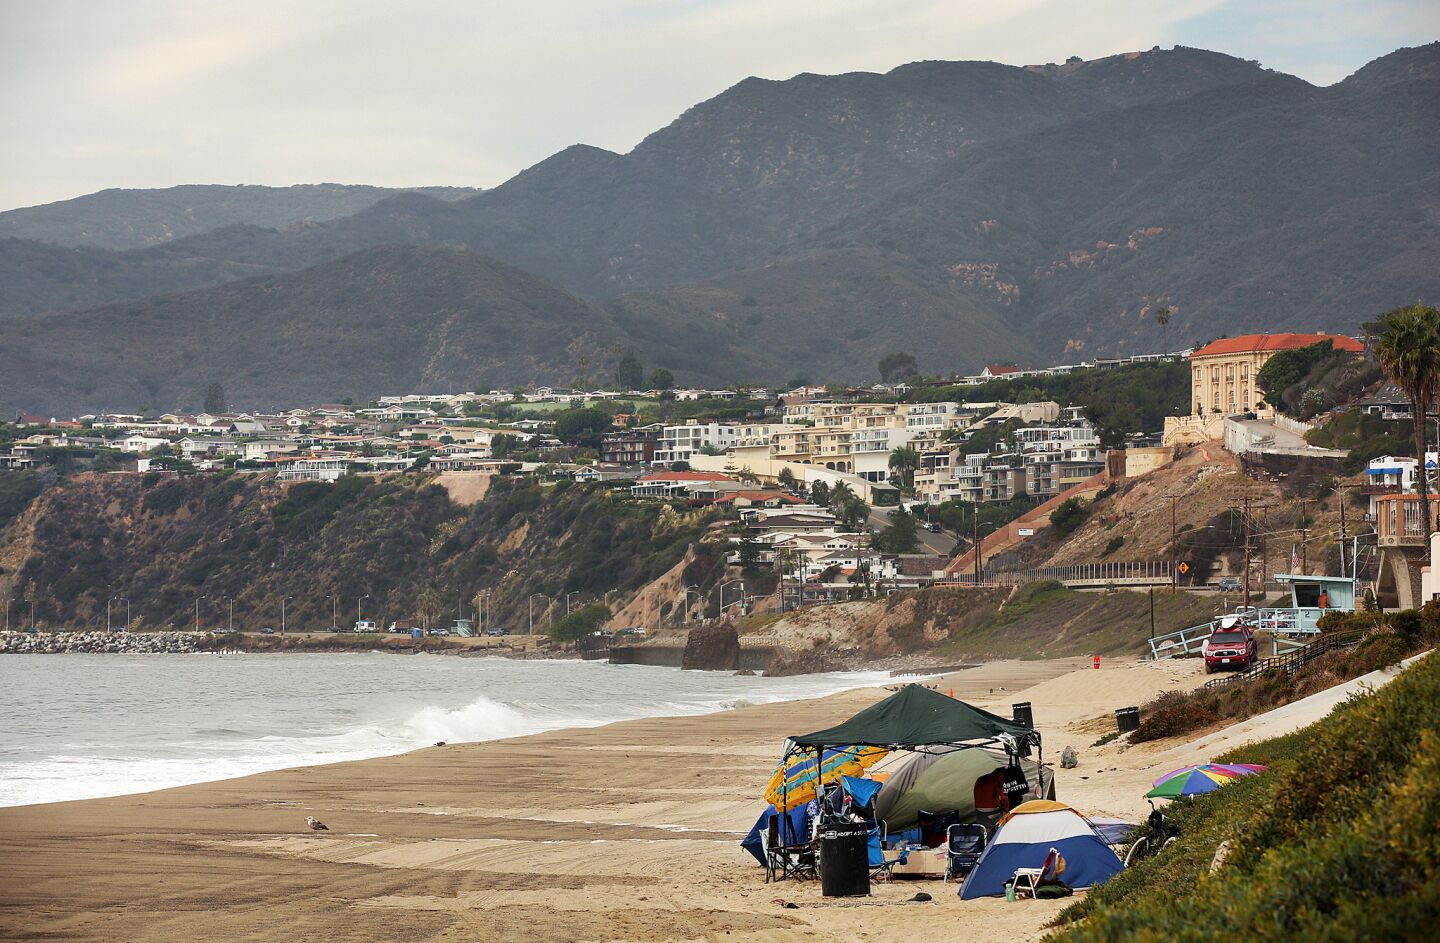 A collection of tents along Will Rogers State Beach. Pacific Palisades residents have taken it upon themselves to help pay for homeless services.